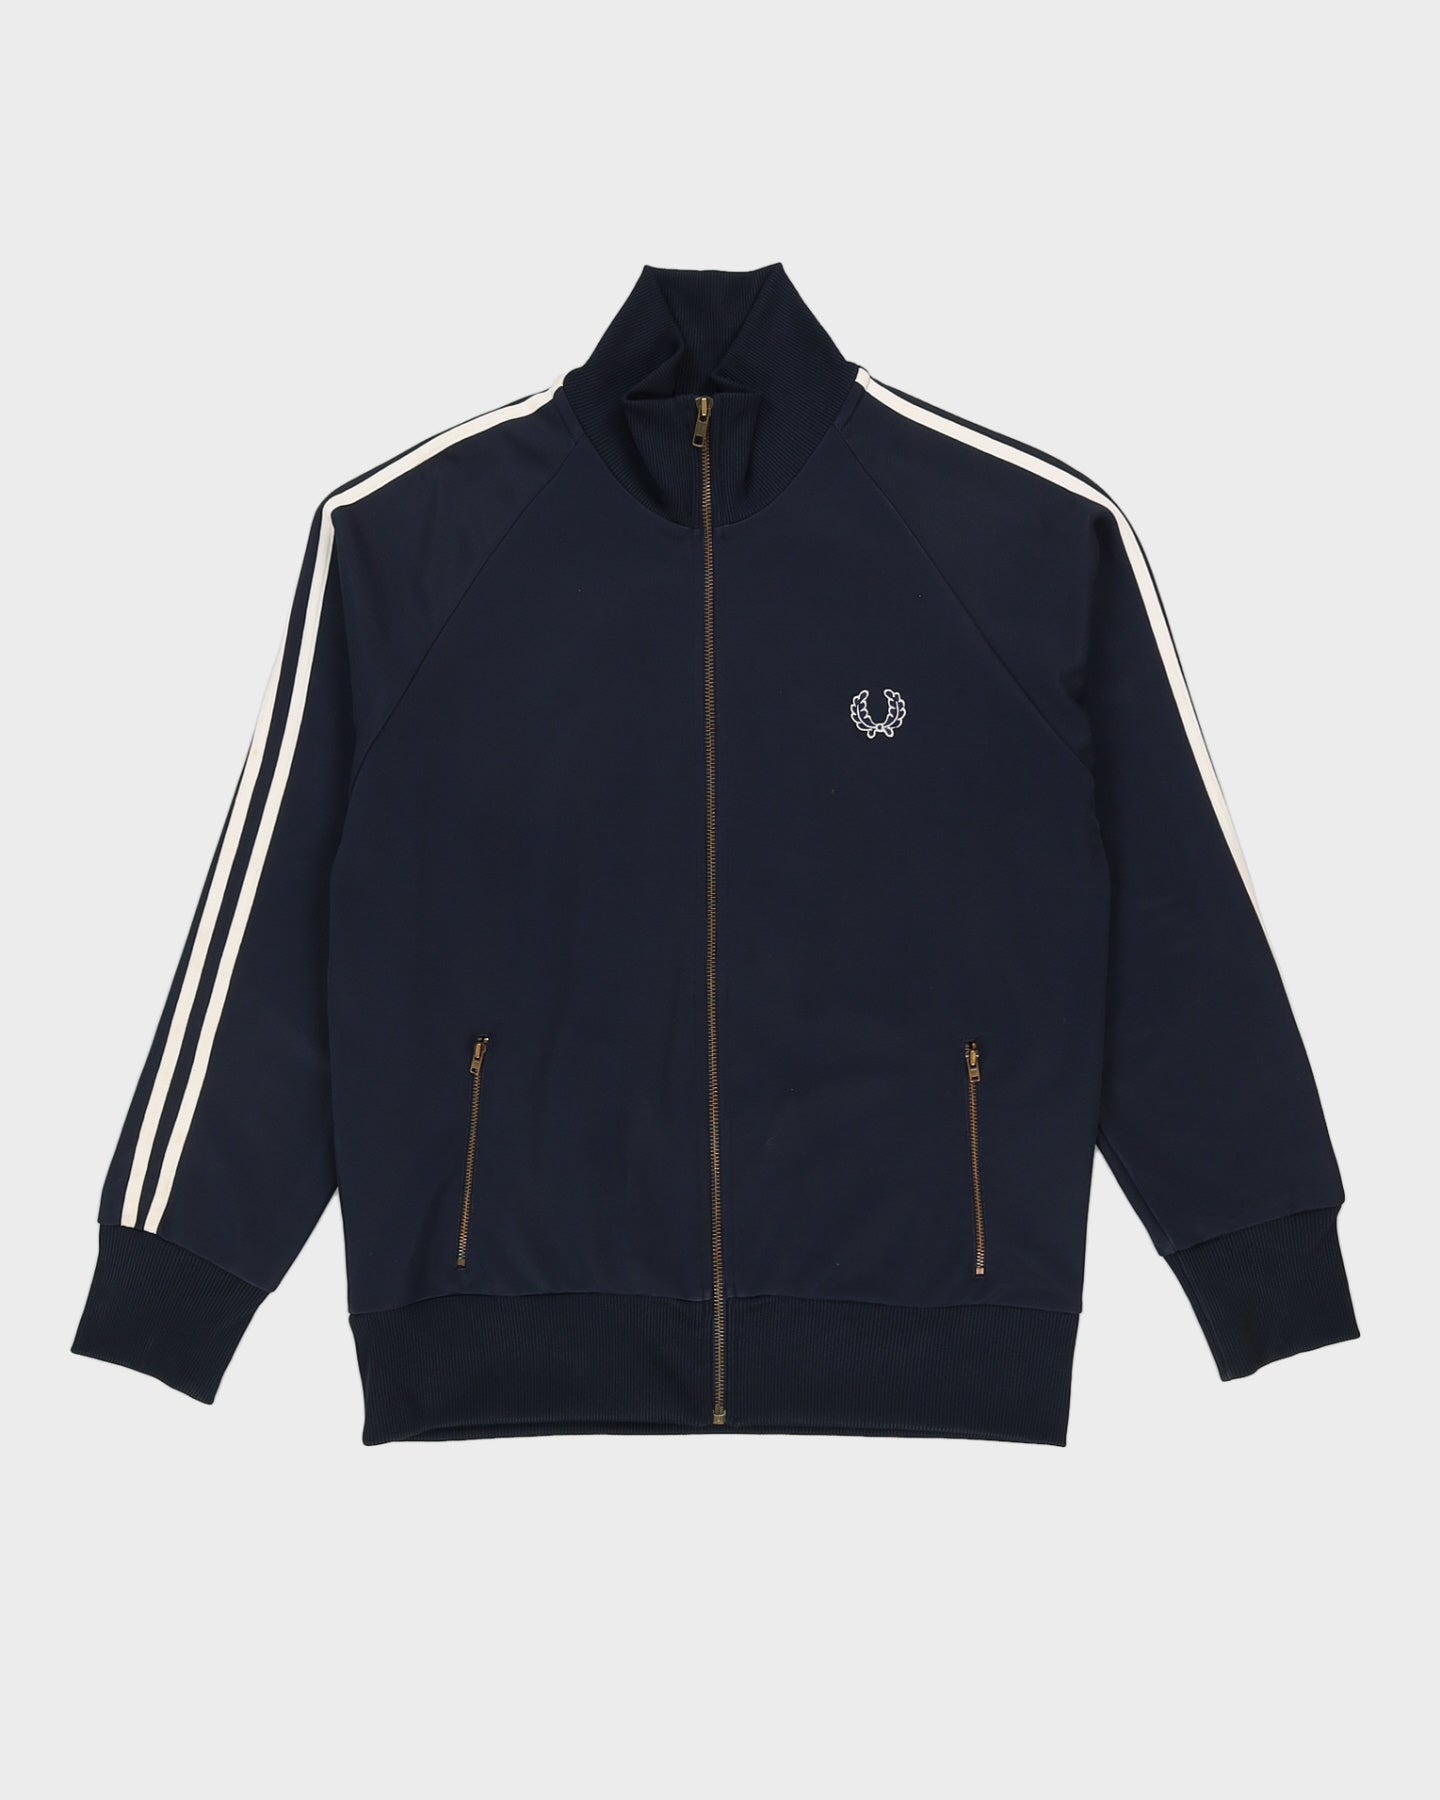 Vintage 90s Fred Perry Blue Navy Track Jacket - M